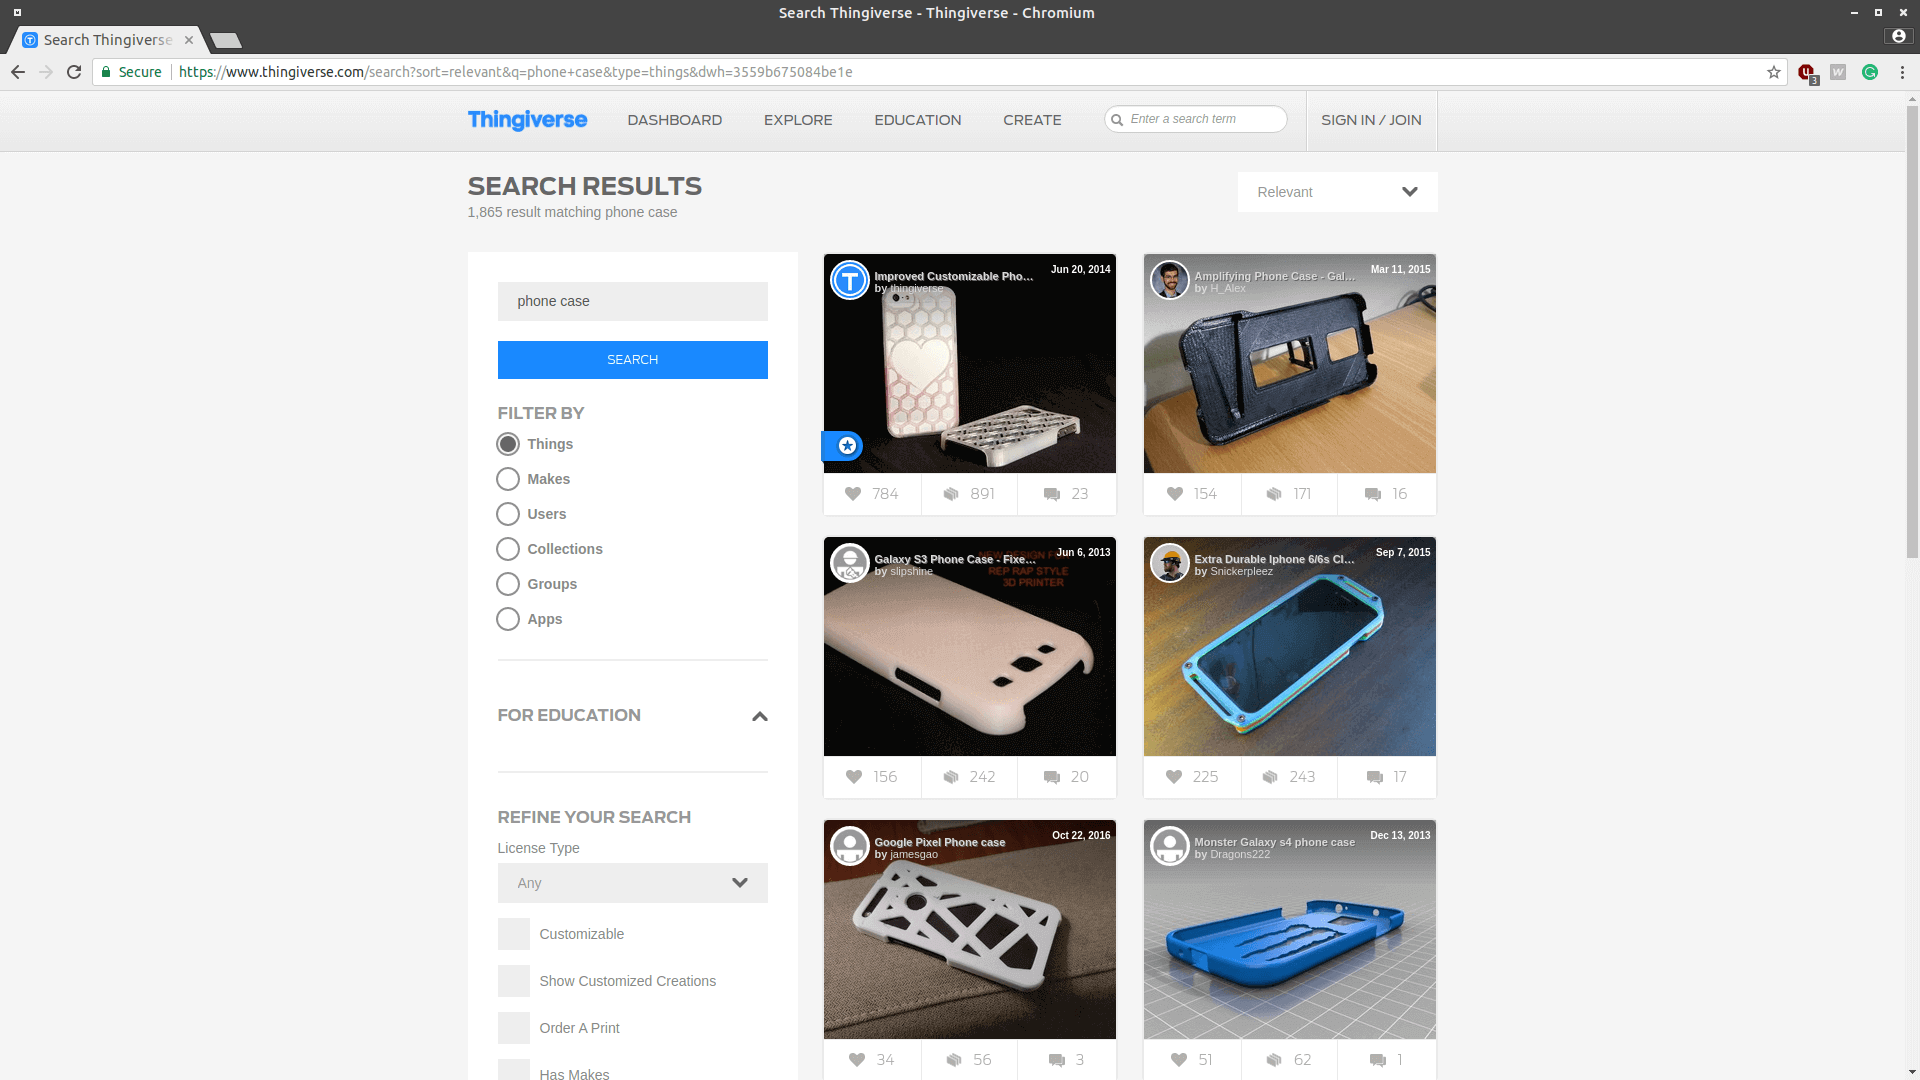 Thingiverse is the biggest repository of STL files